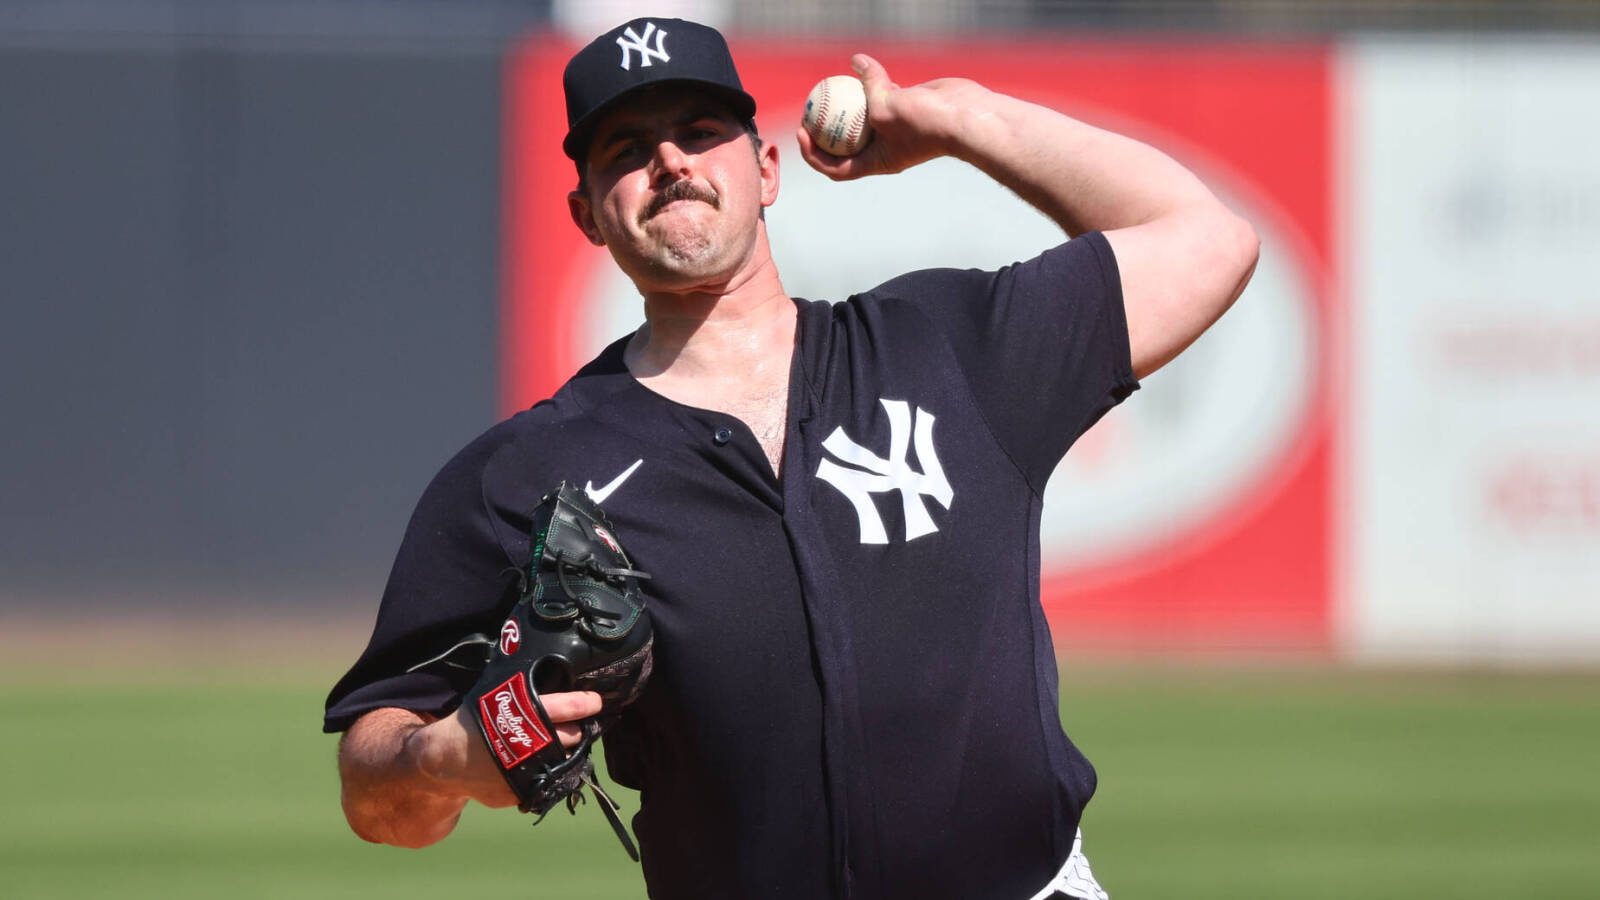 Yankees manager offers update on Carlos Rodon